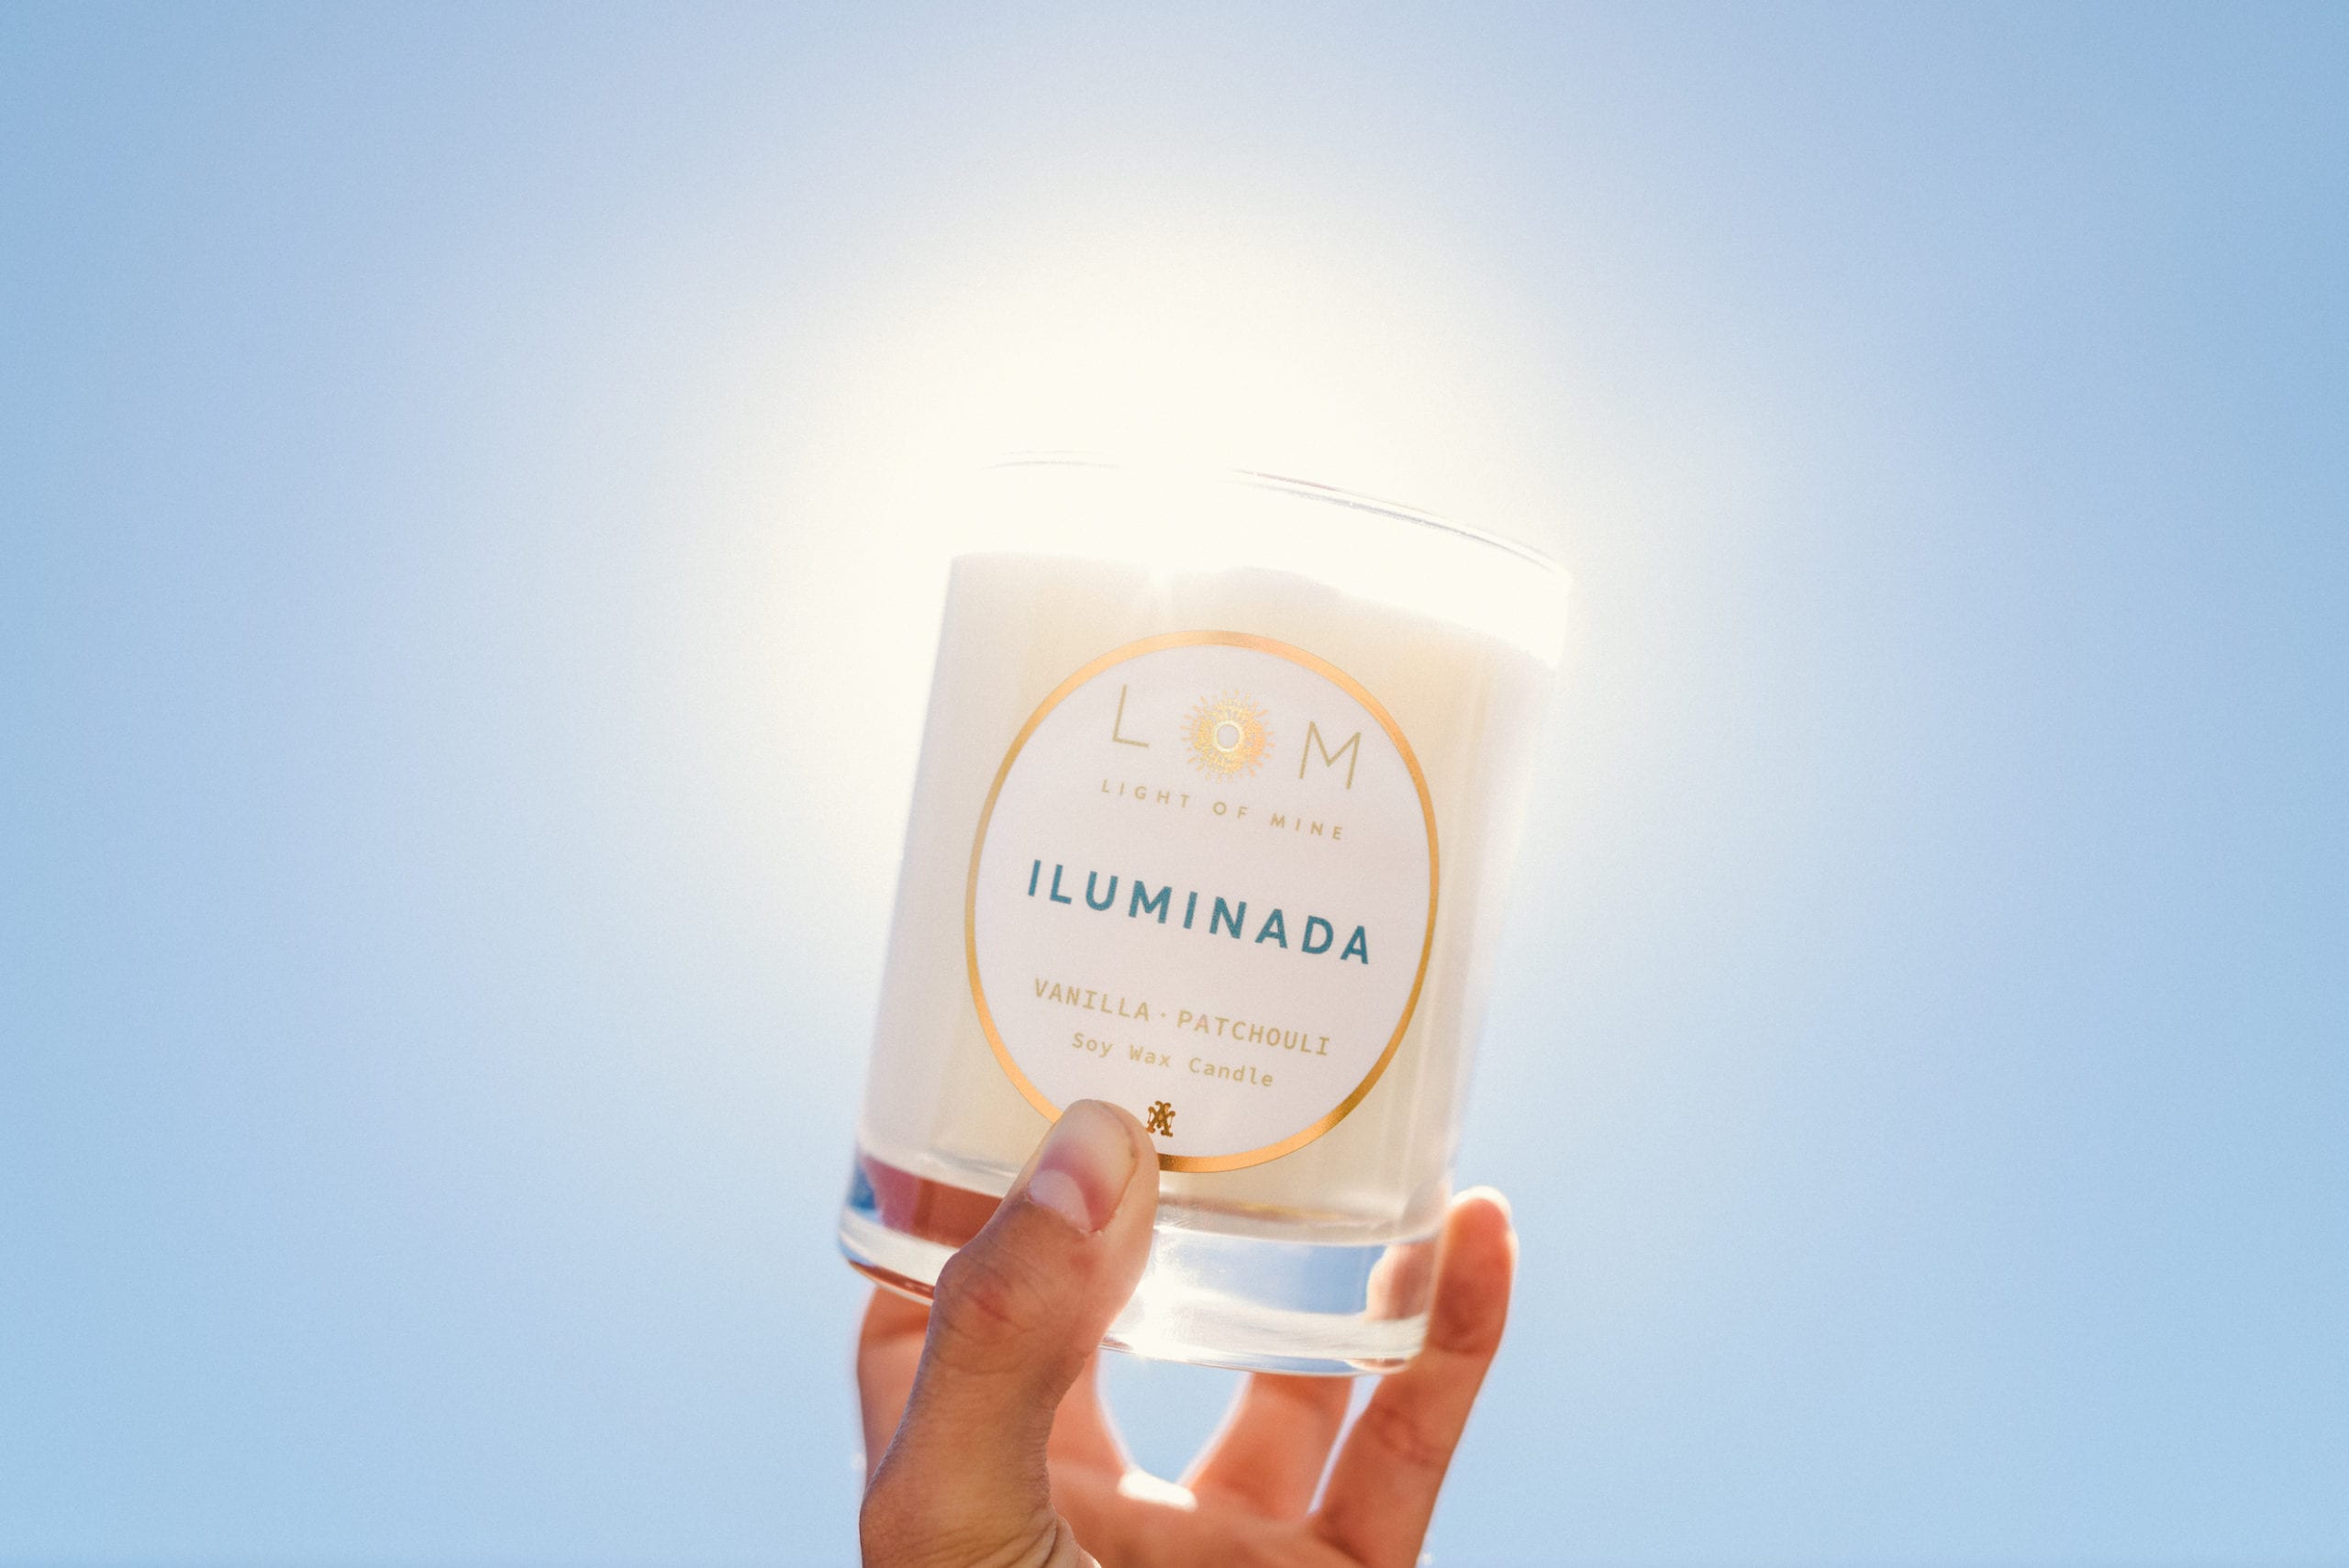 Closeup of hand holding up a LOM Light of Mine Iluminada Vanilla Patchouli candle against the sun